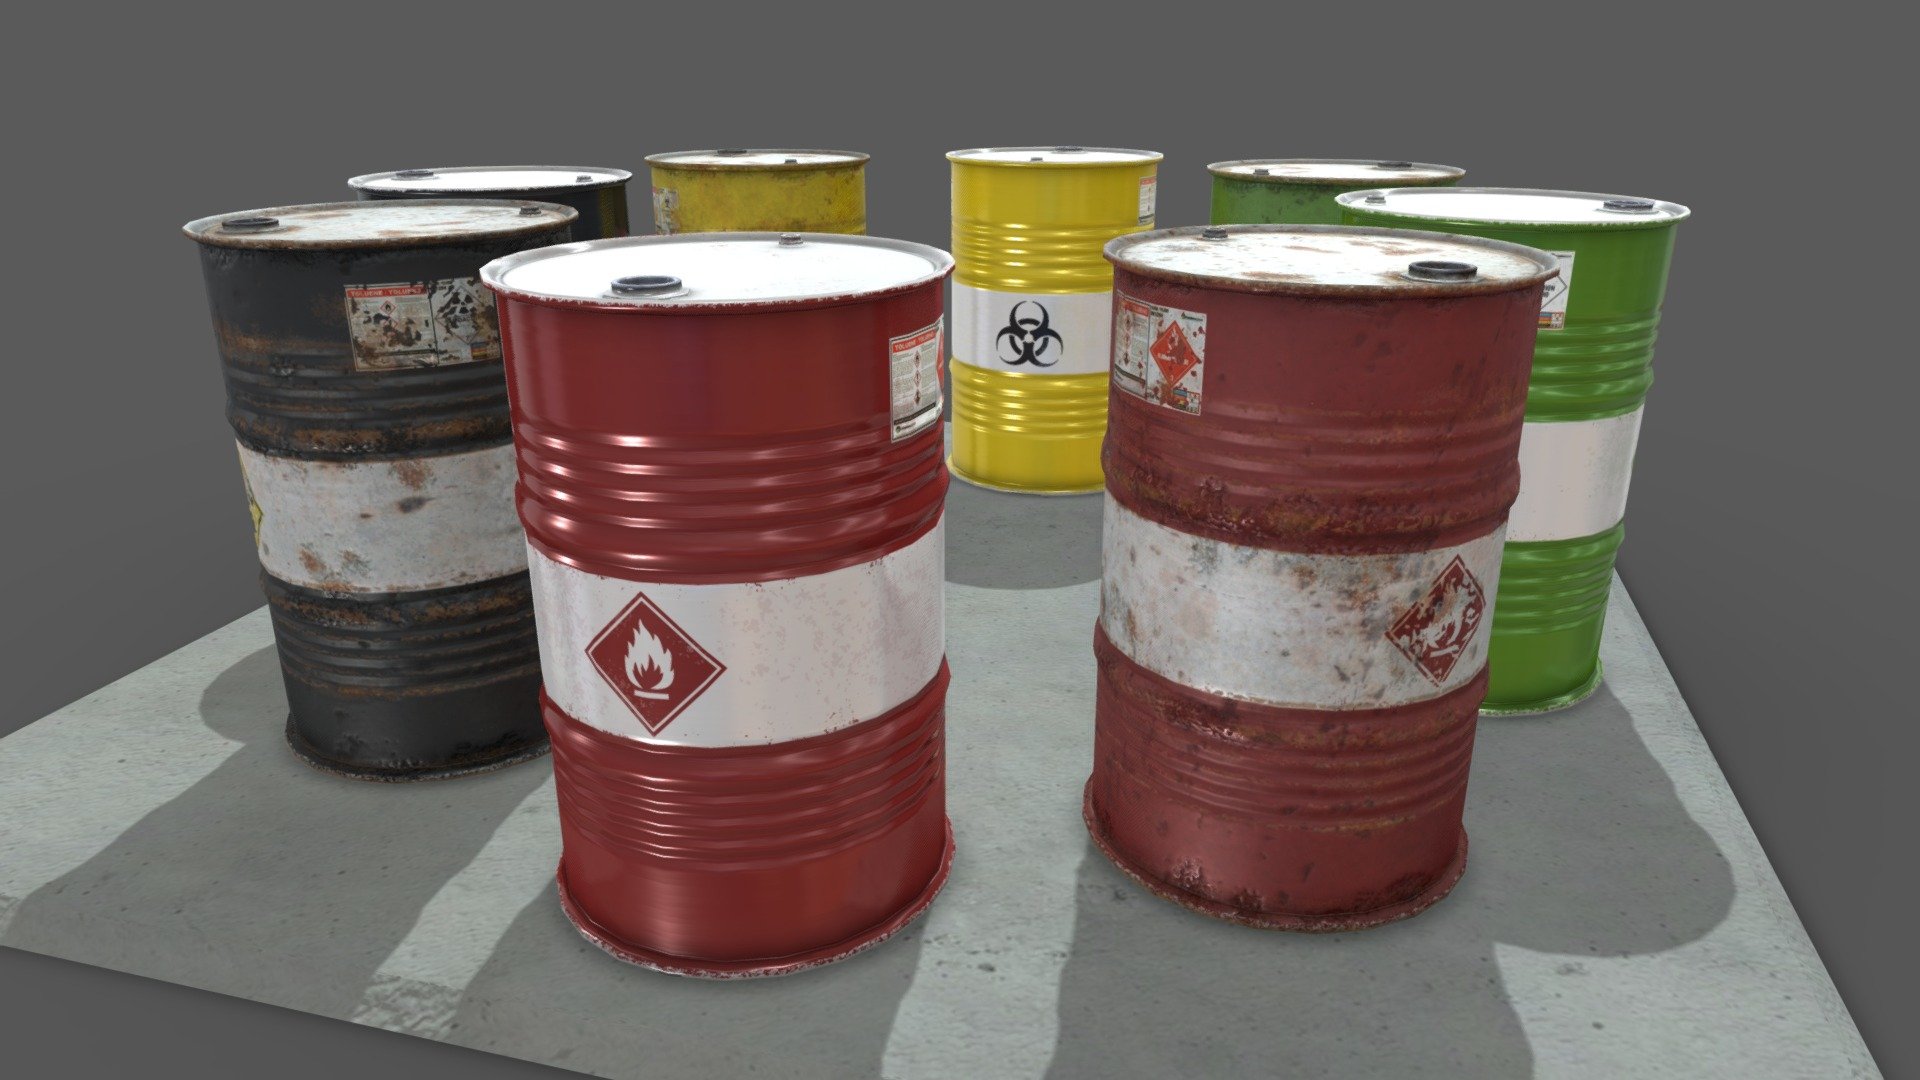 Realistic metal drums with colour and images for 4 different types of material. Brand new drums as well as old rusty versions. So 8 in total all with texture and normal maps. The mesh is low poly for use in games, with enough detail to hold up under scrutiny but most of the work is being done by the normal map 3d model